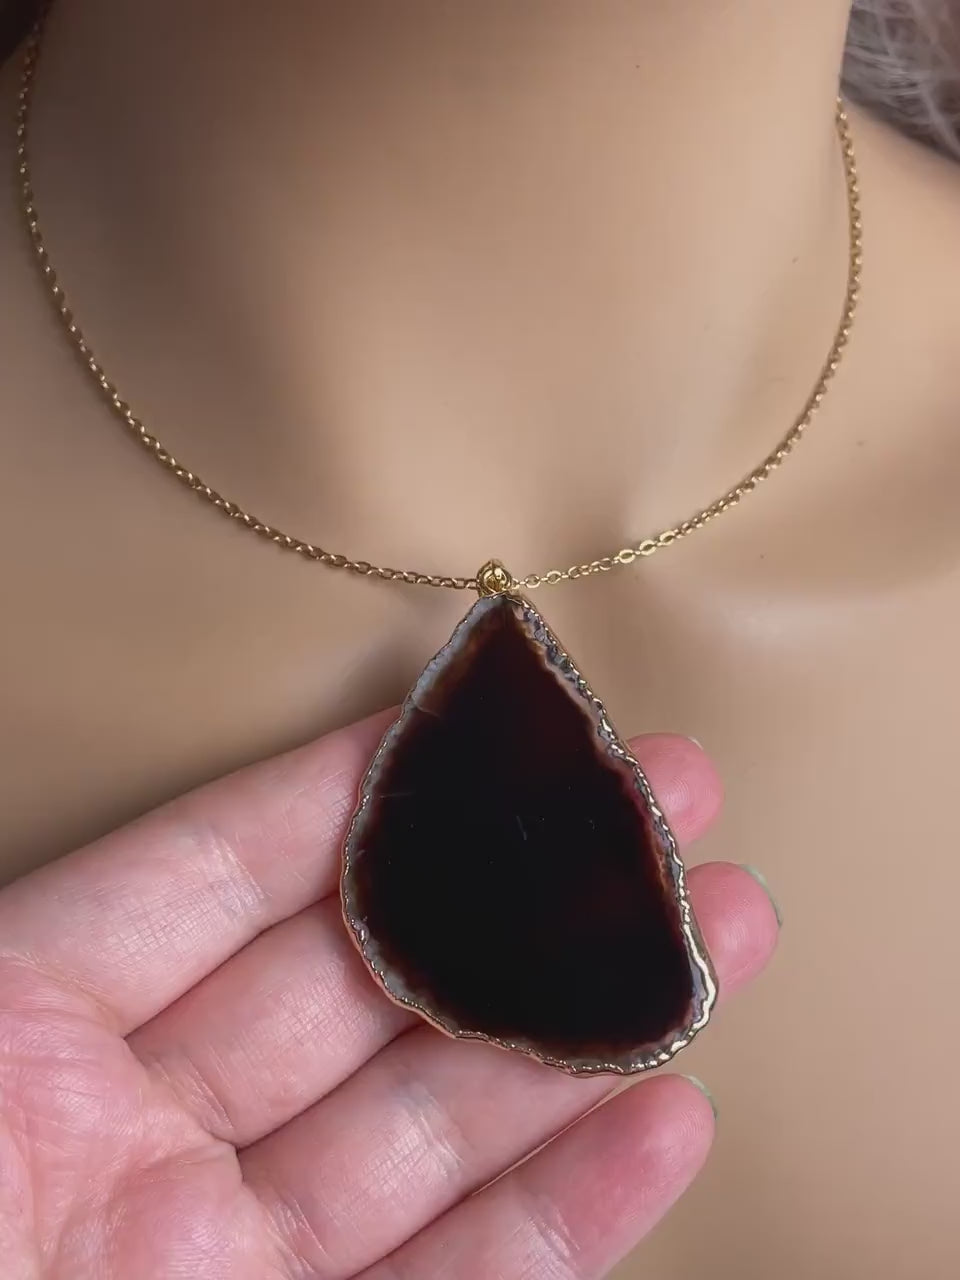 Unique Black Agate Slice Necklace Gold, Long Pendant Necklaces Women's, Gifts For Mom, G15-92